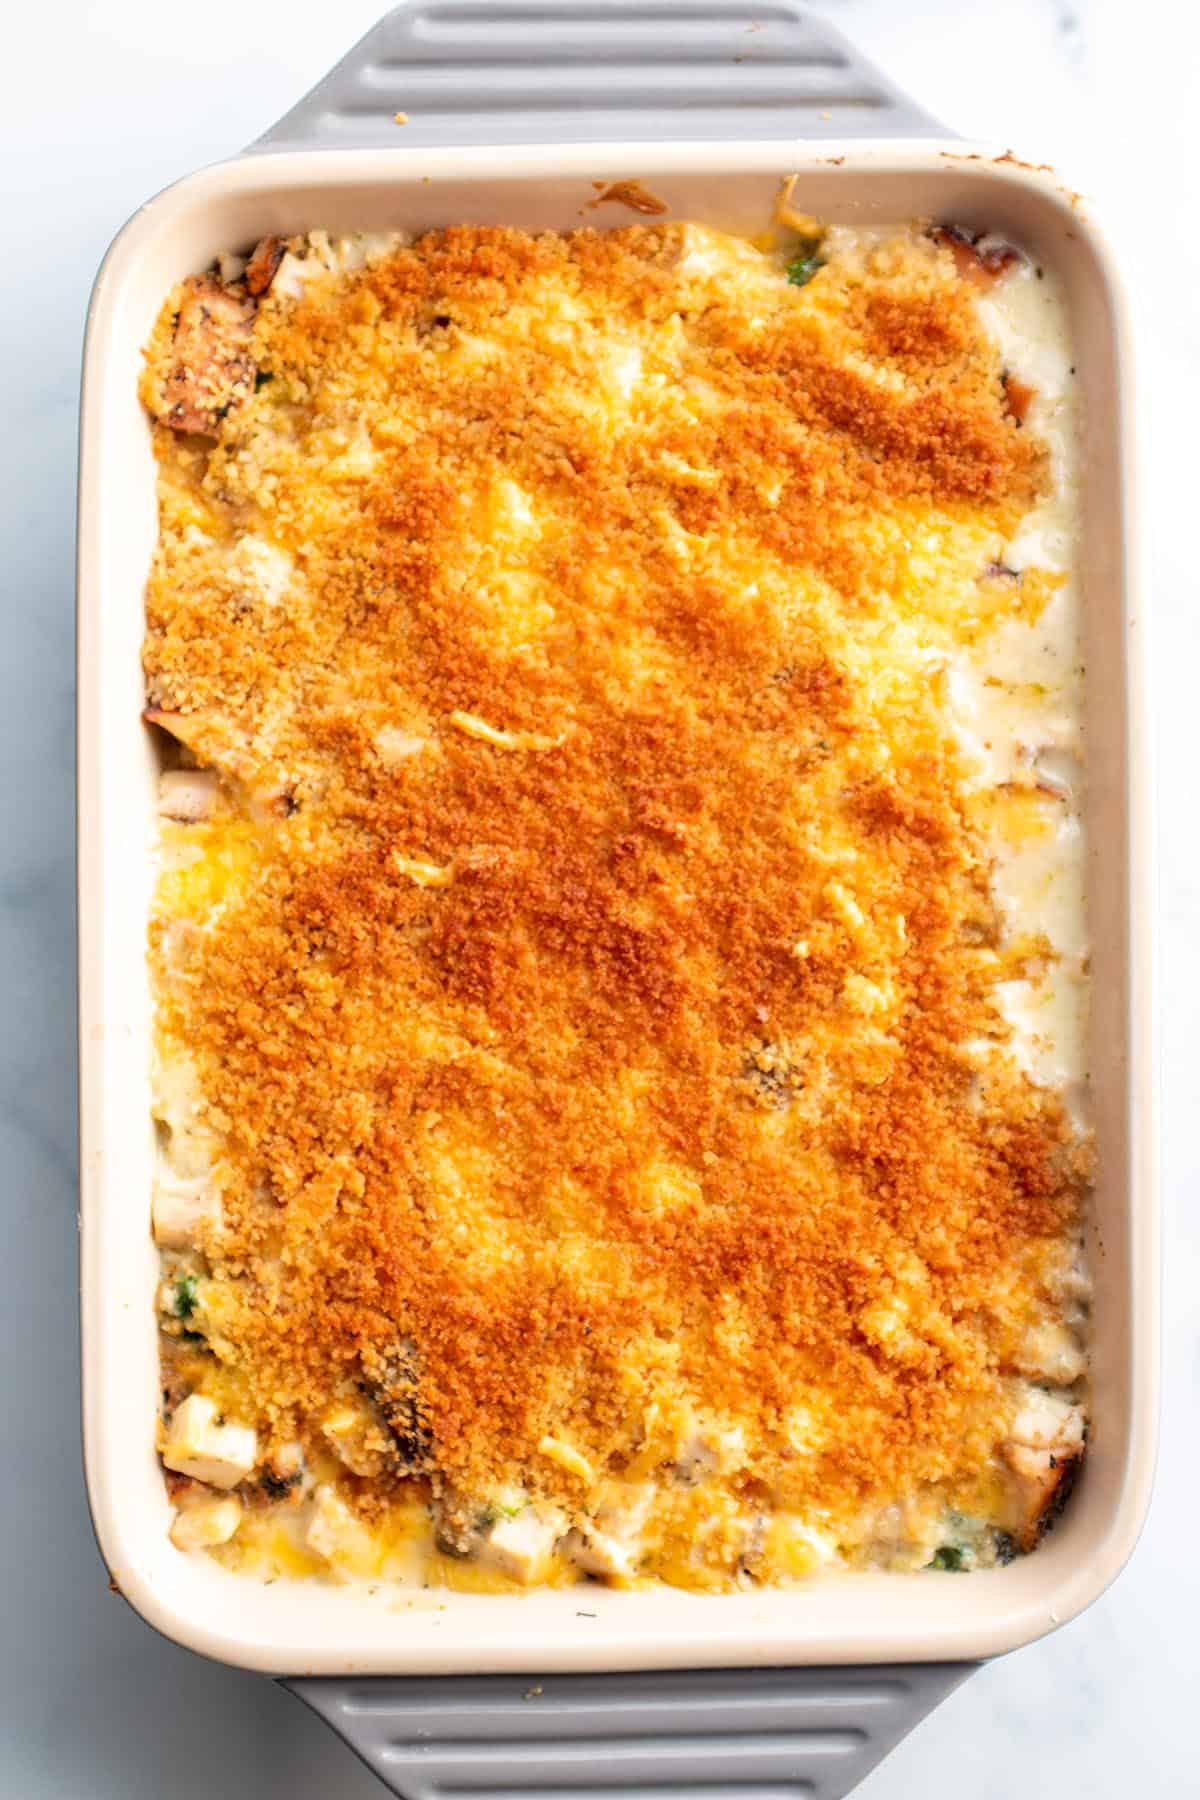 A baking dish with a turkey divan, creamy sauce and toasted panko crumbs.